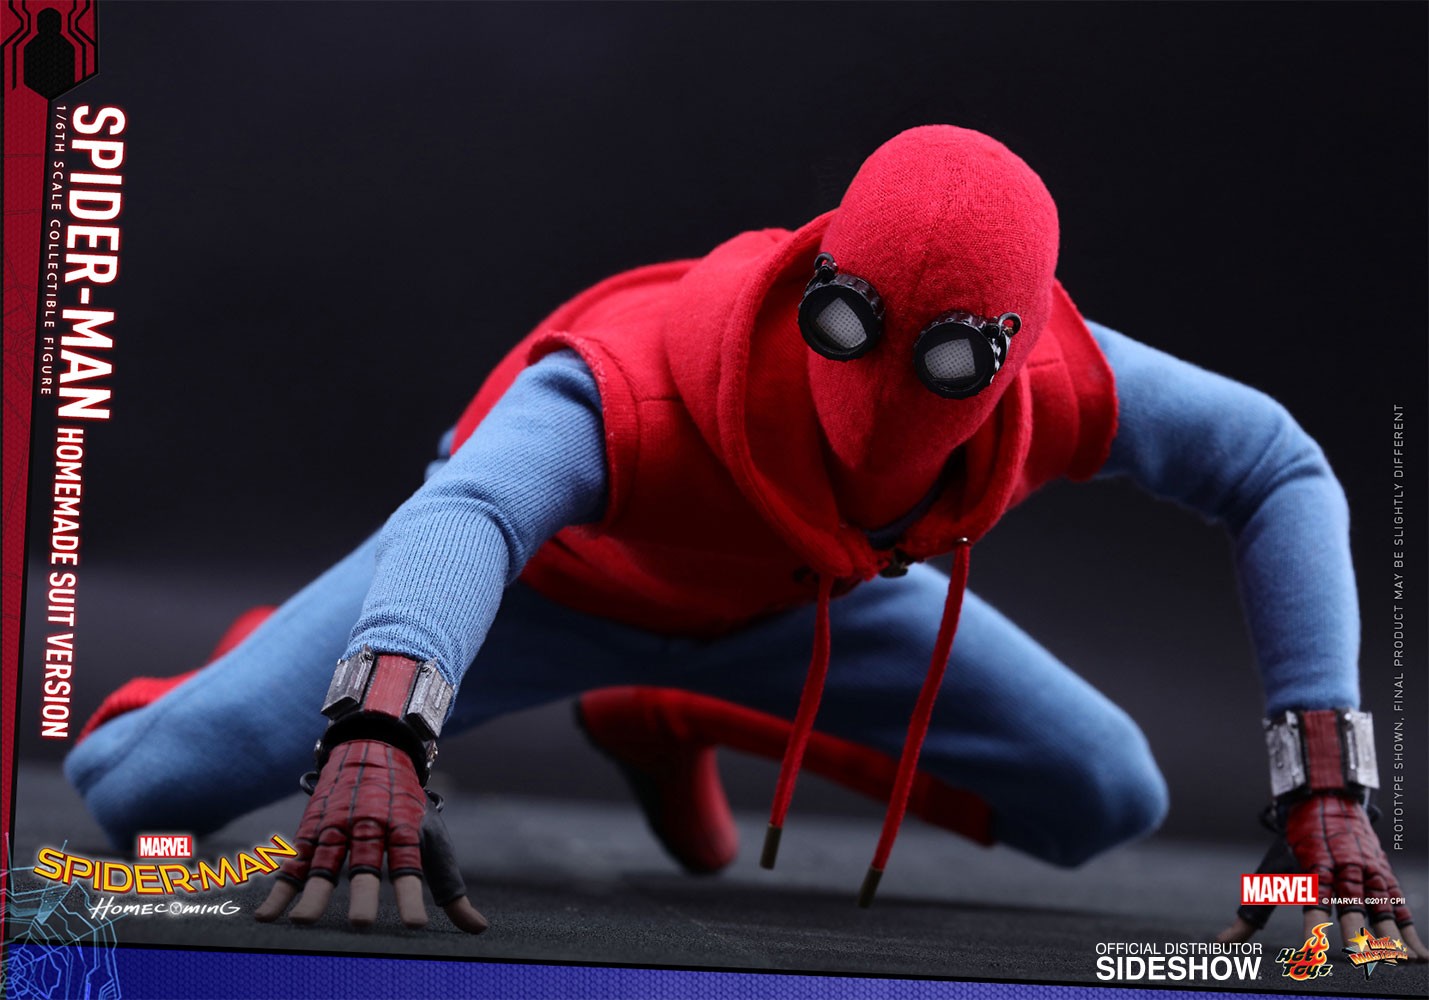 Spider-Man Homemade Suit Version (Prototype Shown) View 6